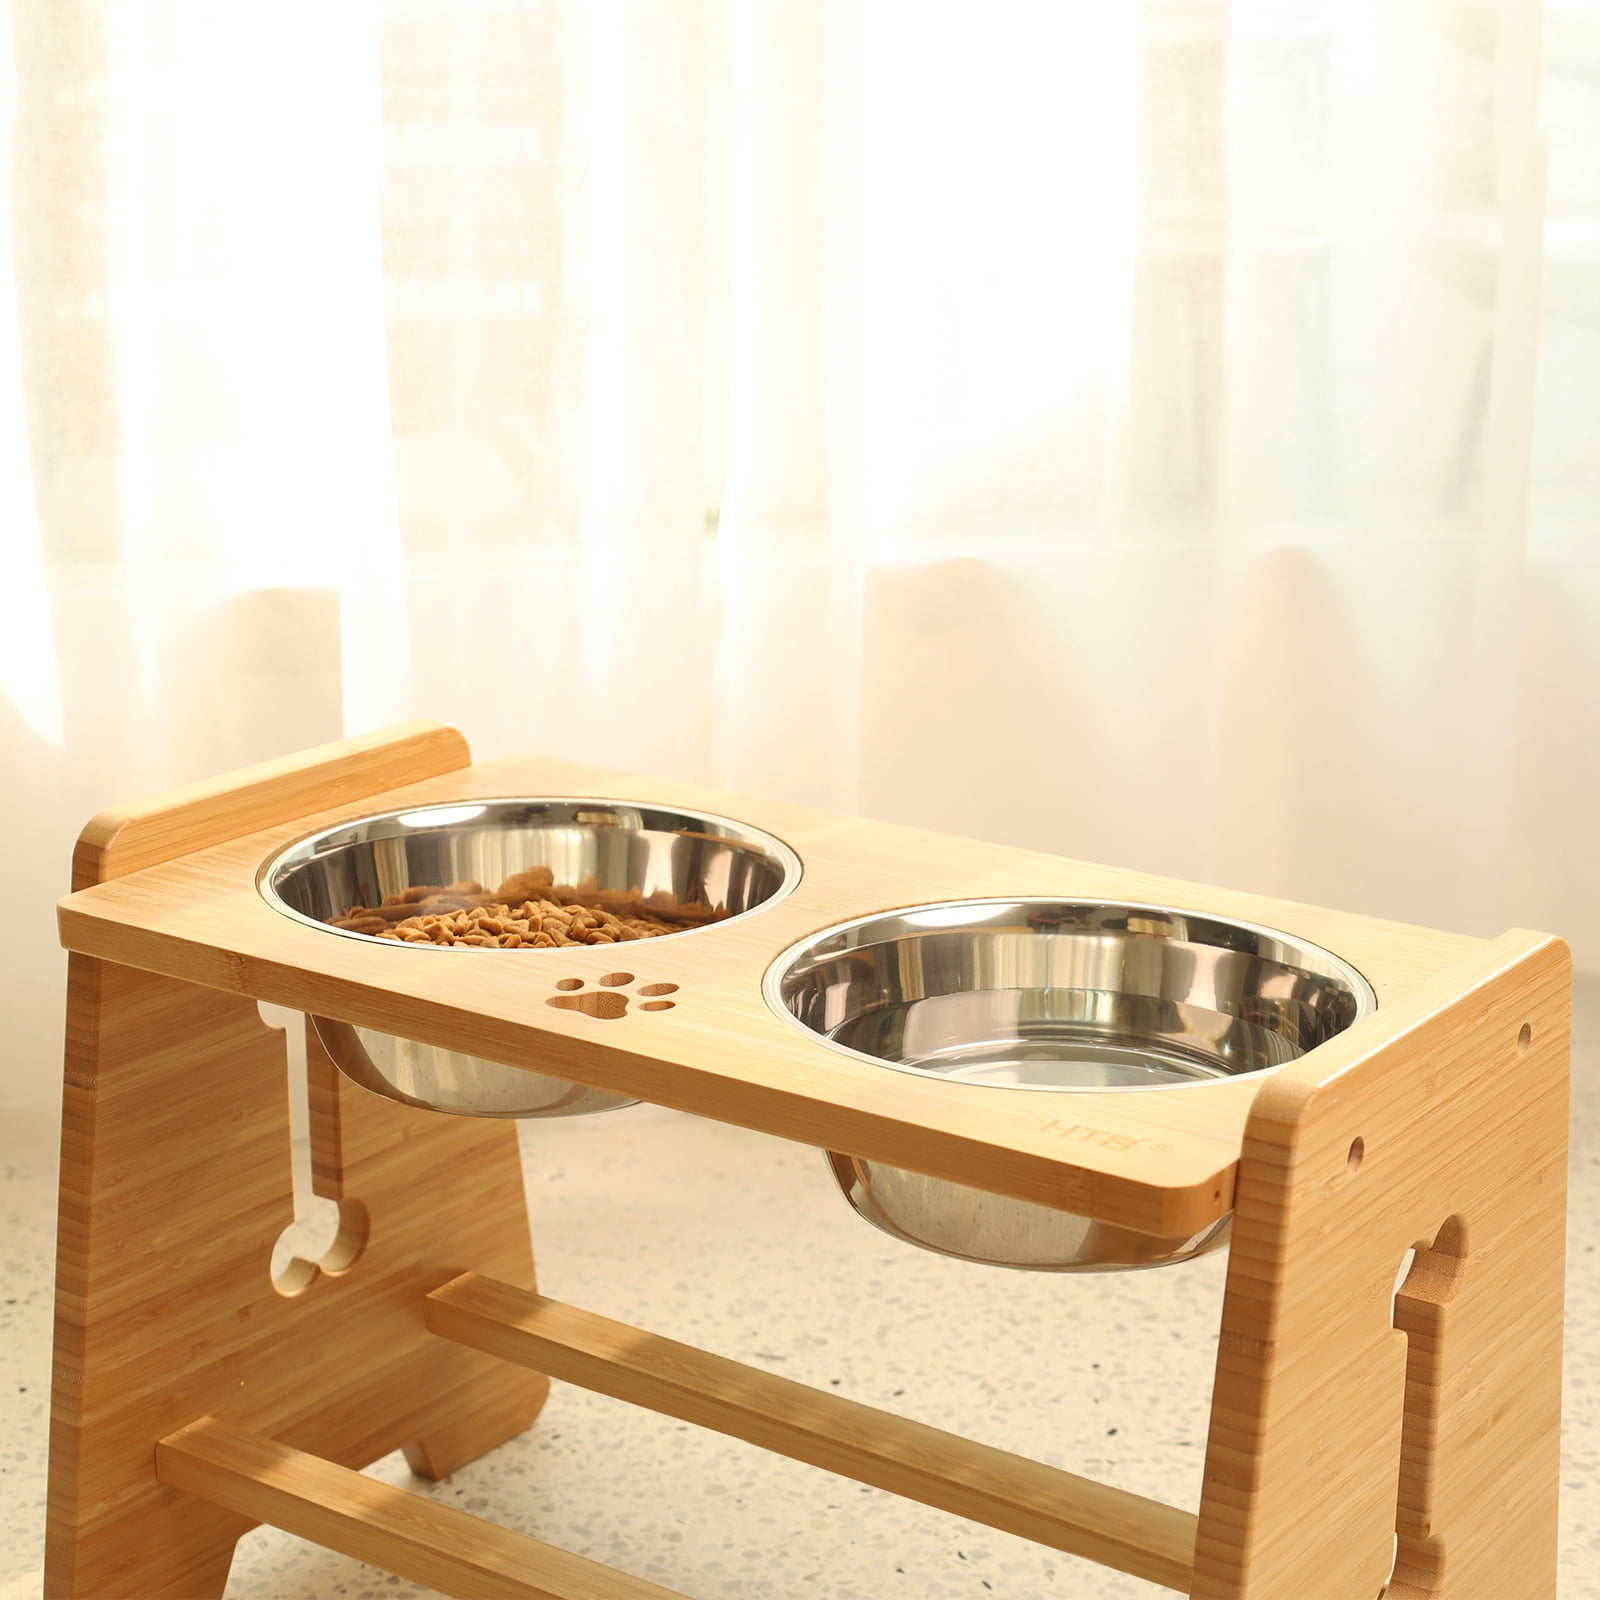 Alpeir Elevated Dog Bowls for Large Dogs, Raised Dog Bowl Stand with 2 Bowls,  Adjustable Pet Food Water Bowl, Retro Brown - Yahoo Shopping